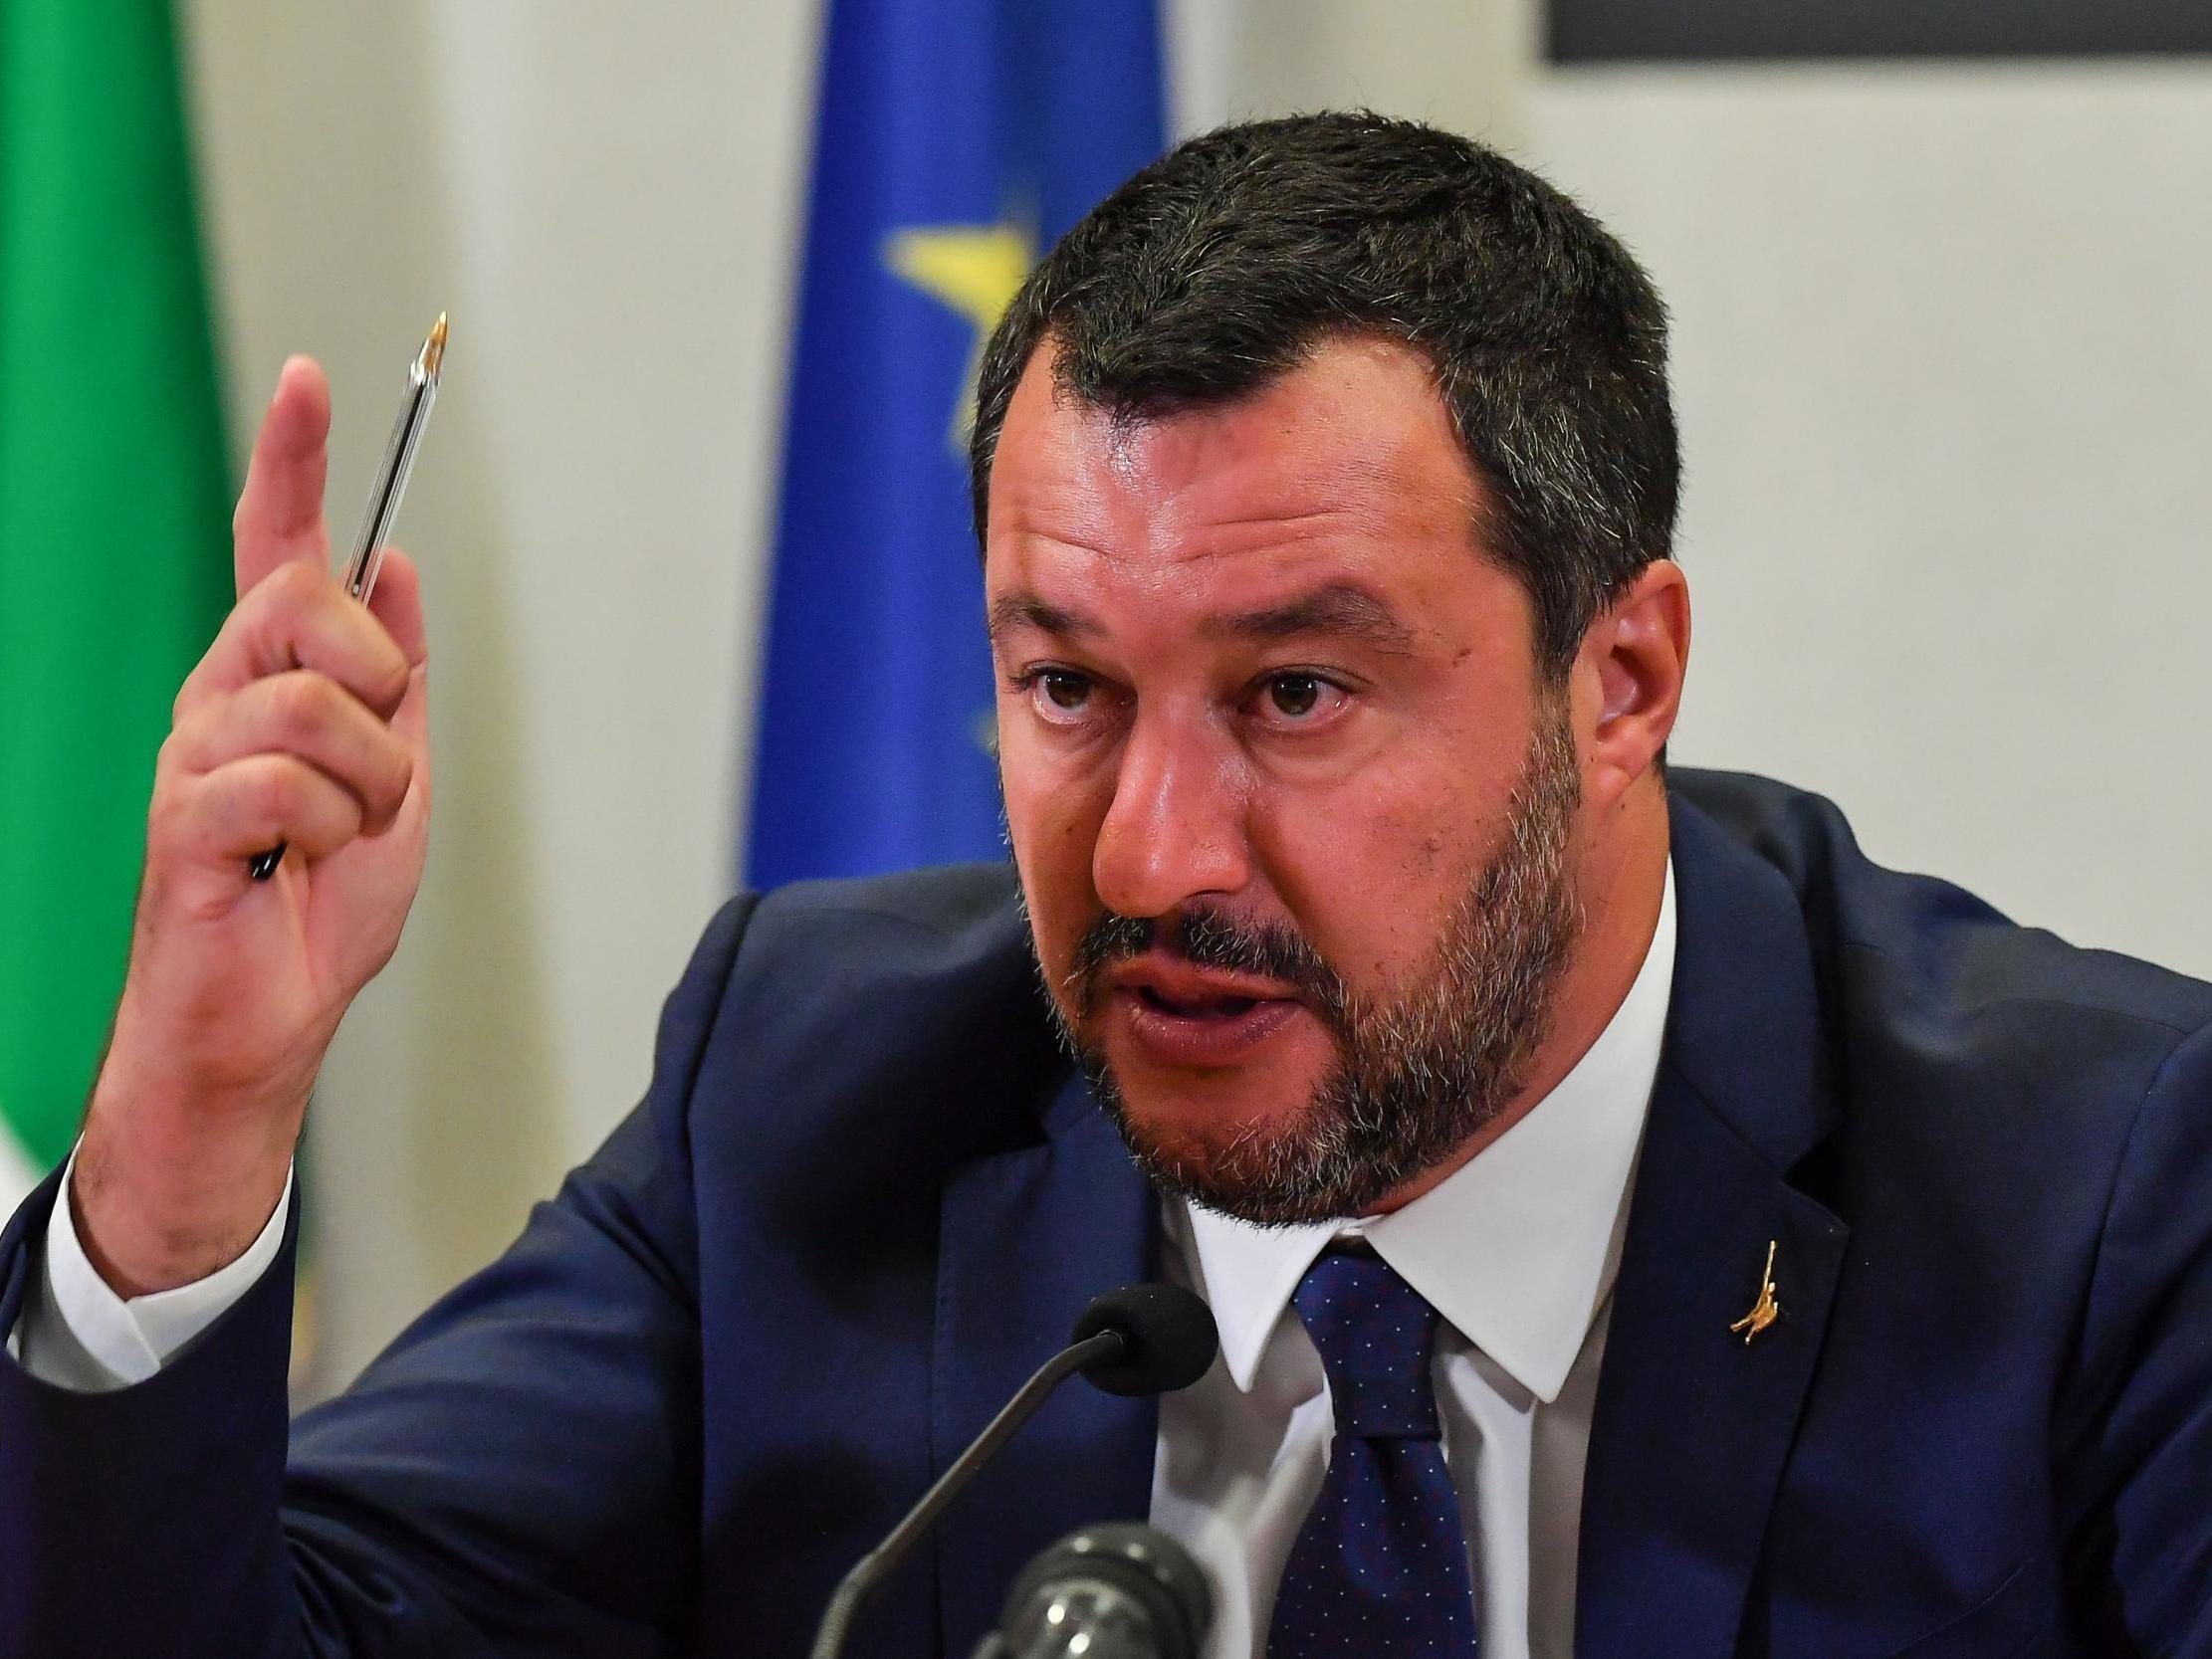 Italy's far-right government has left European leaders searching for a solution to the crisis